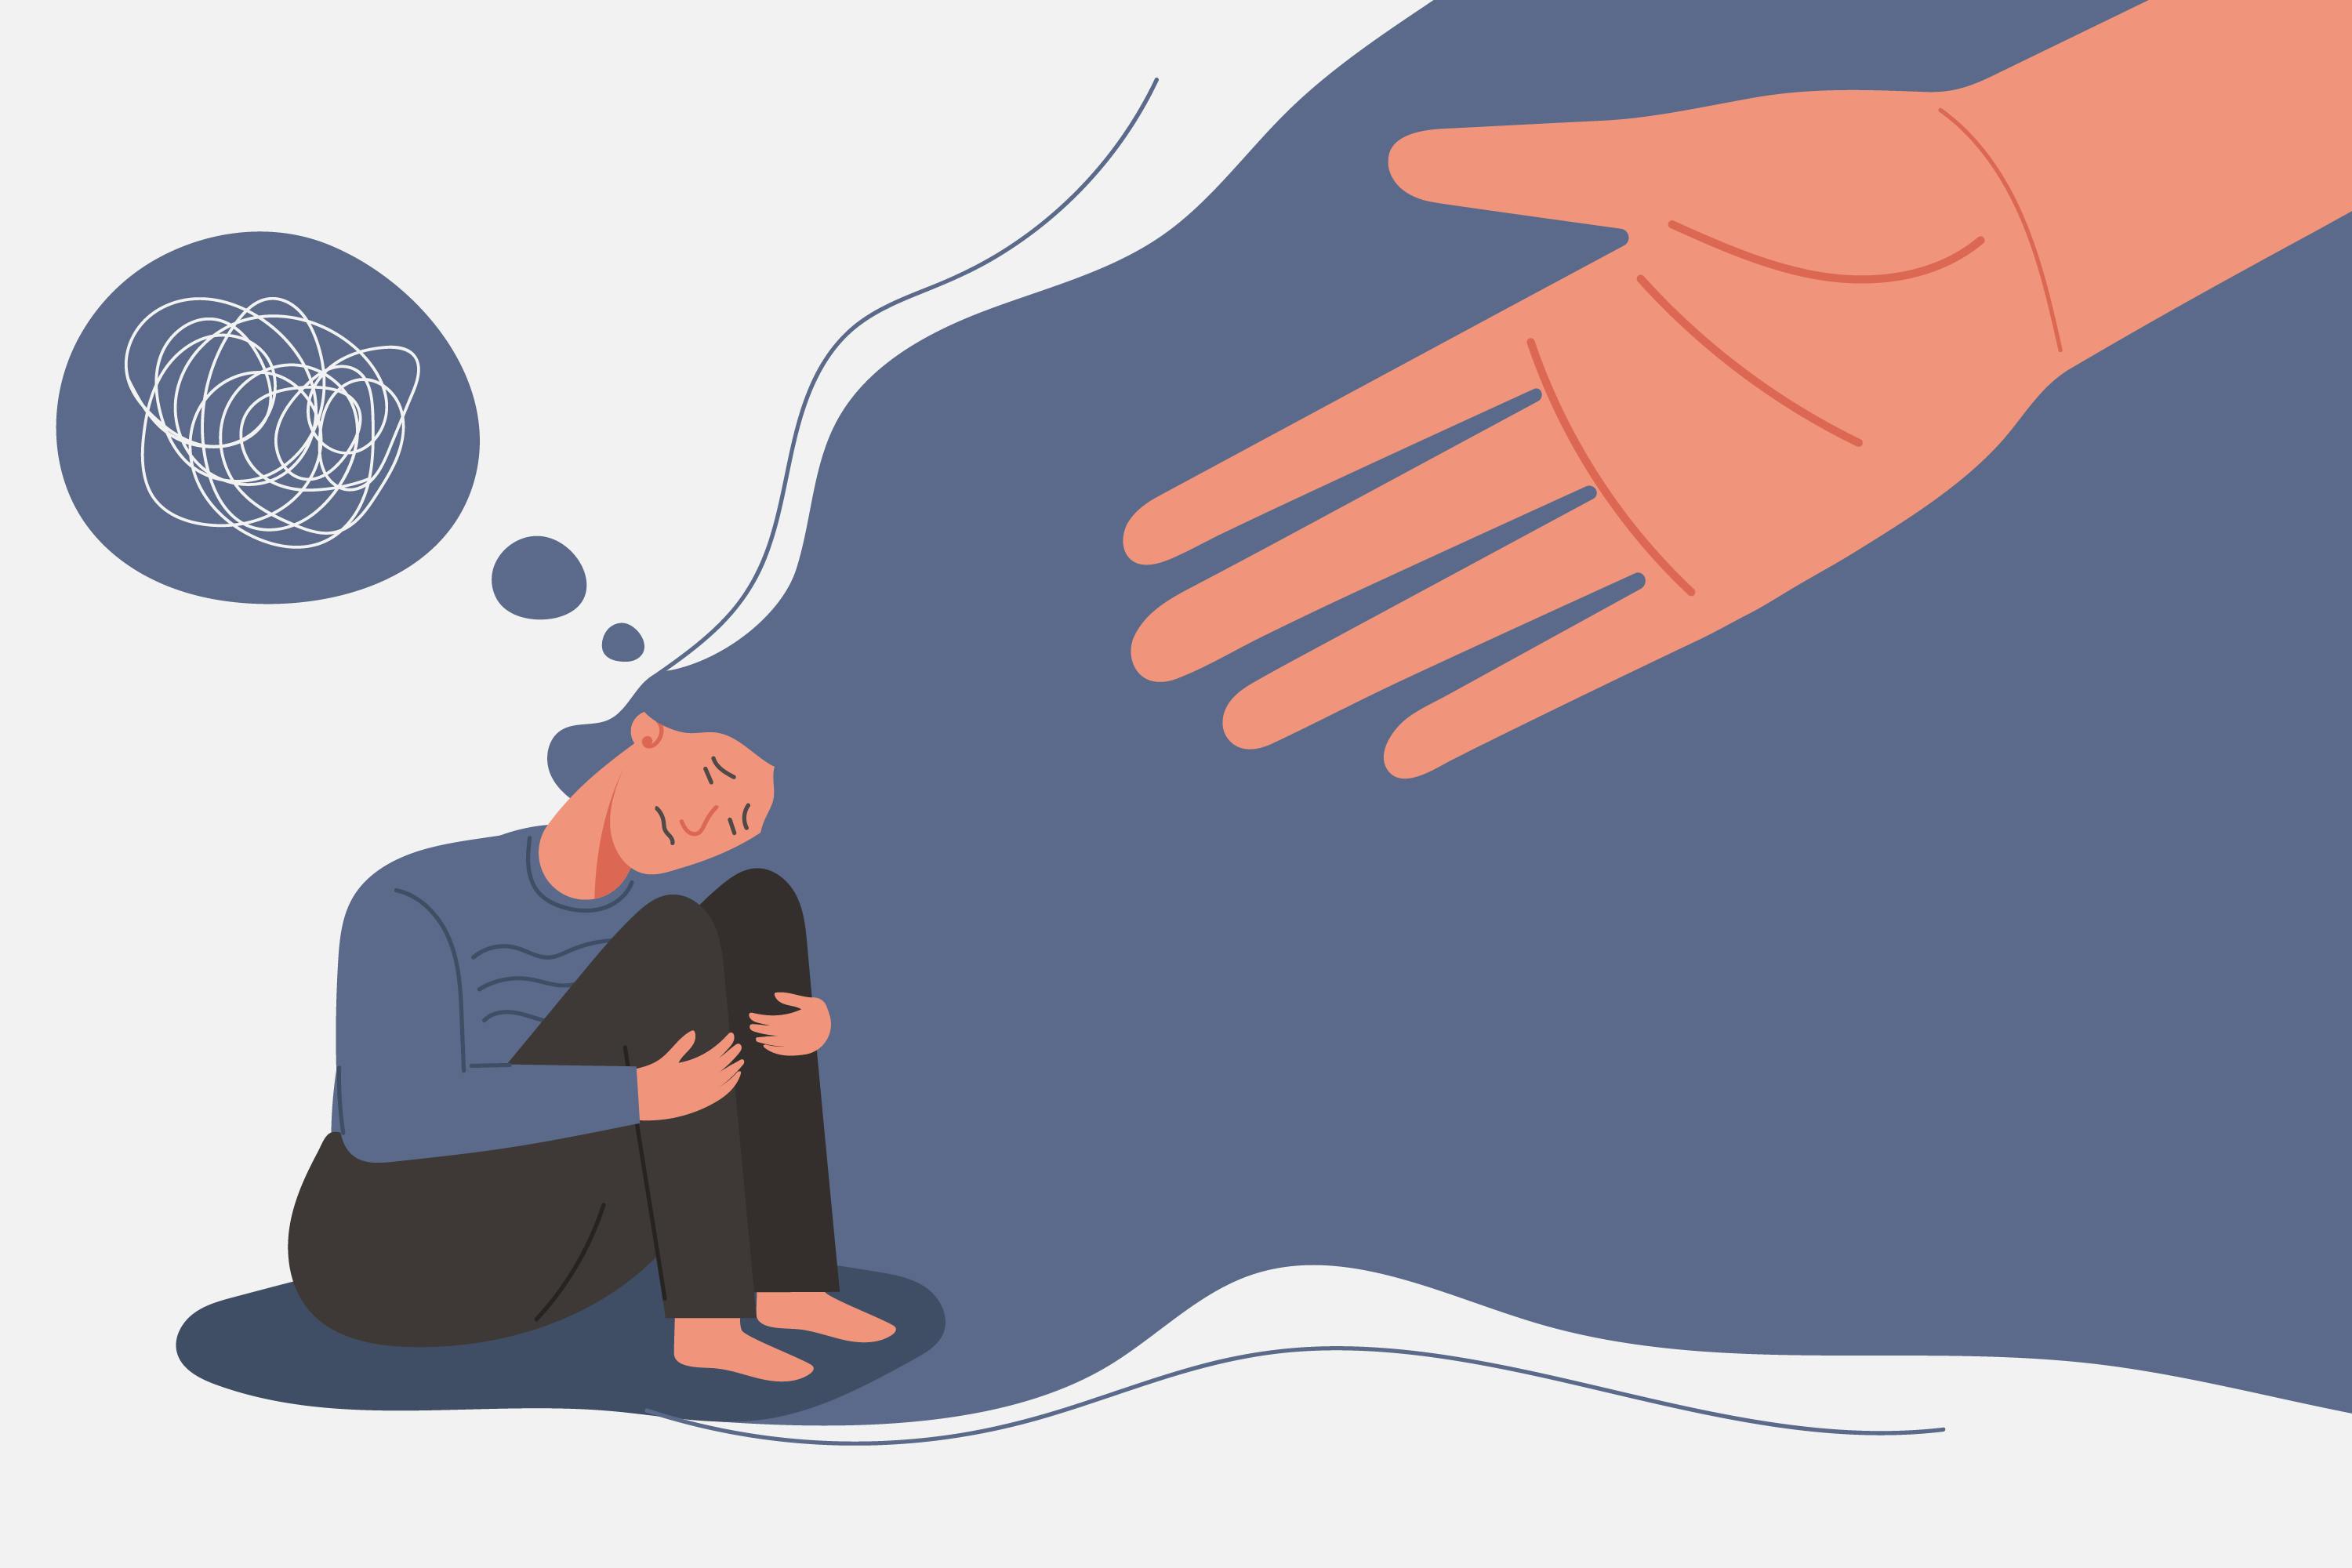 Illustration of an oversized human hand reaching out to help a sad and confused person sitting on the ground and hugging their knees.